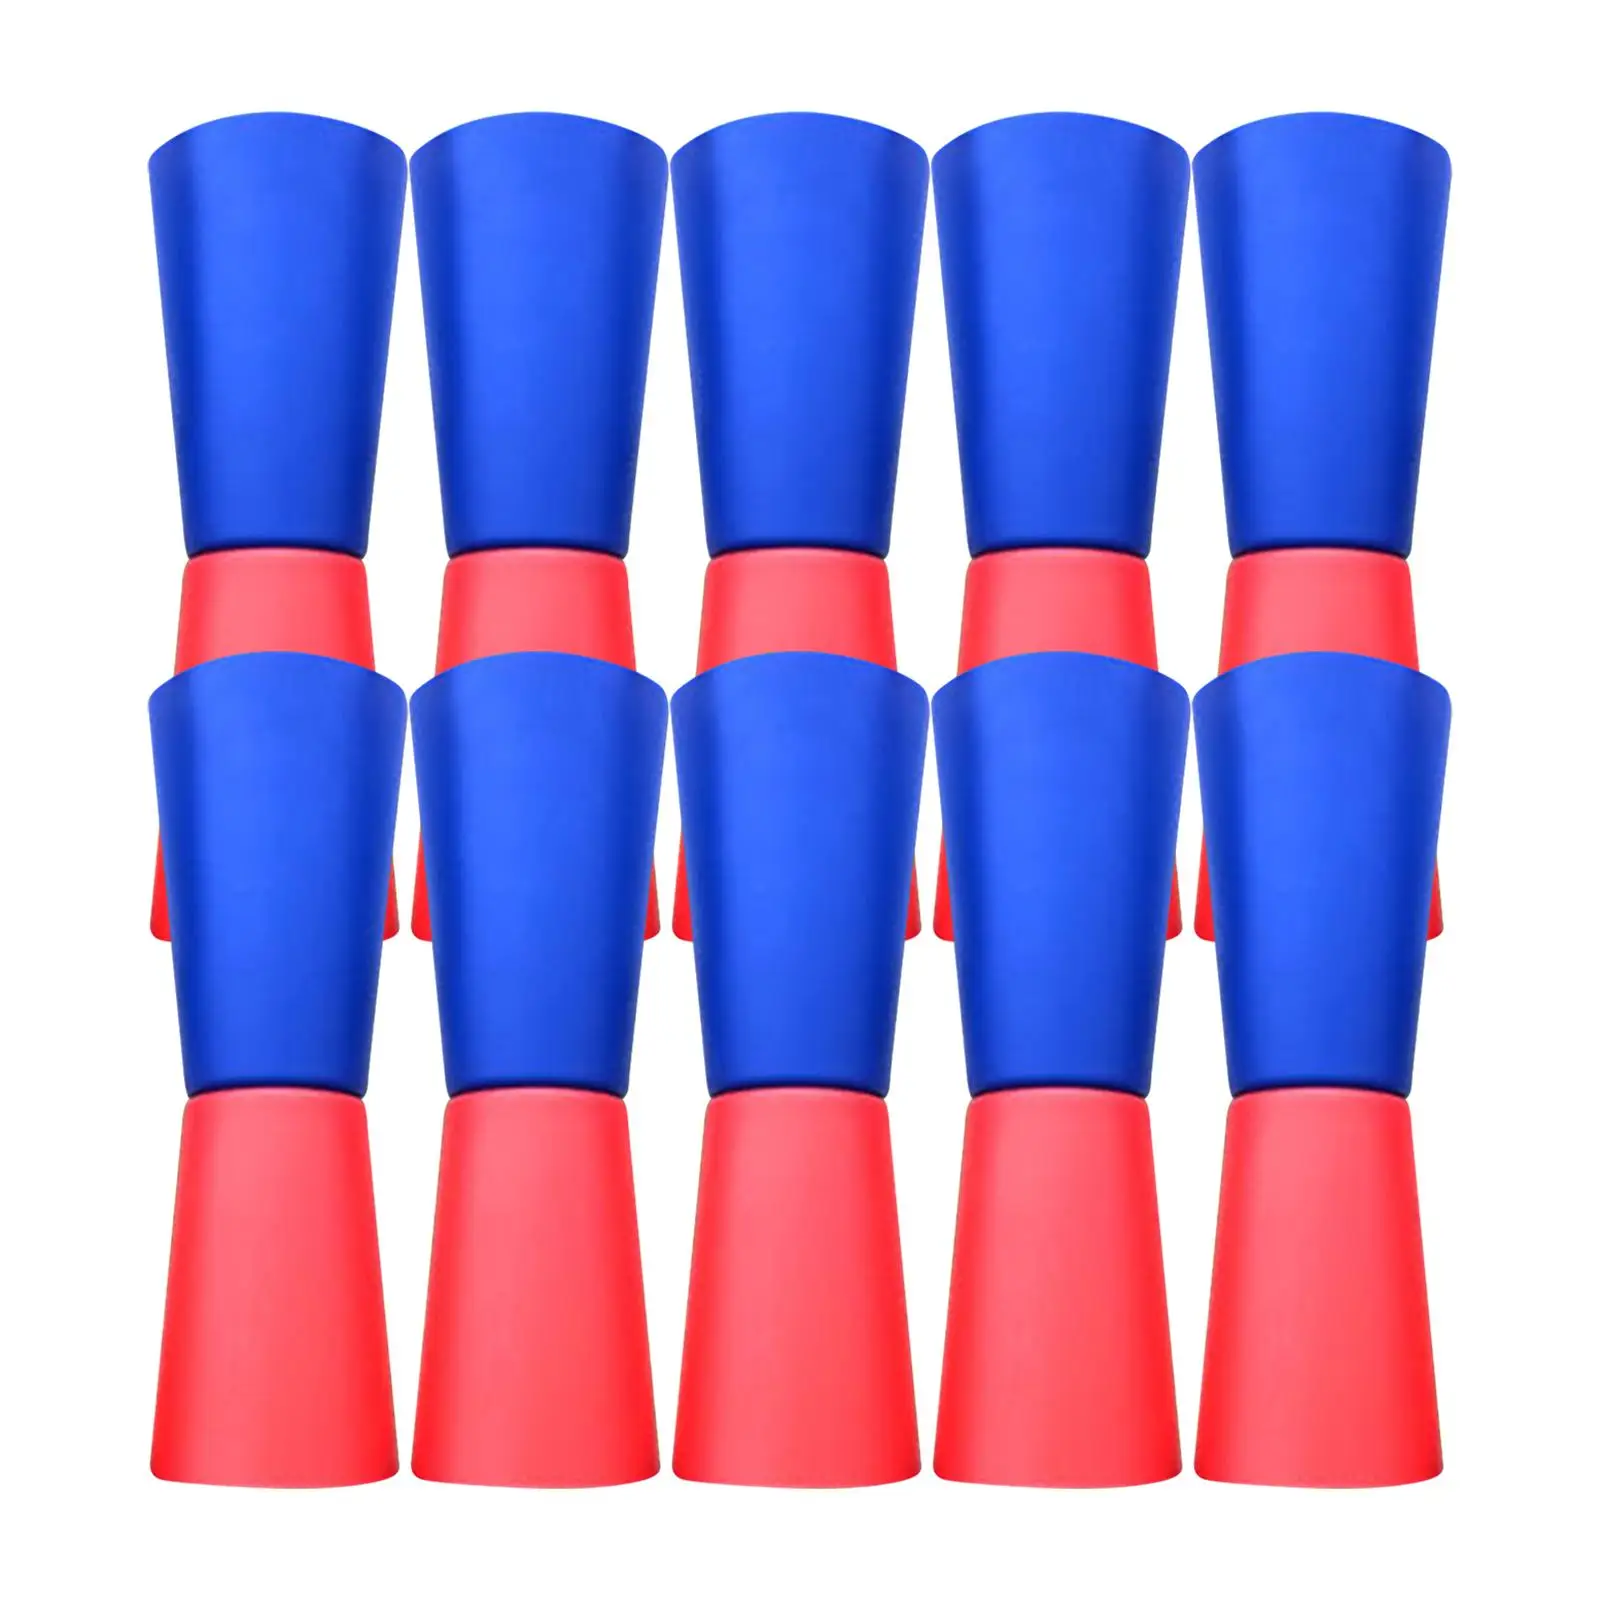 10x Flip Cups Agility Training Body Coordination Sensory Integration Exercise Aid for Rugby Football Basketball Outdoor with Net